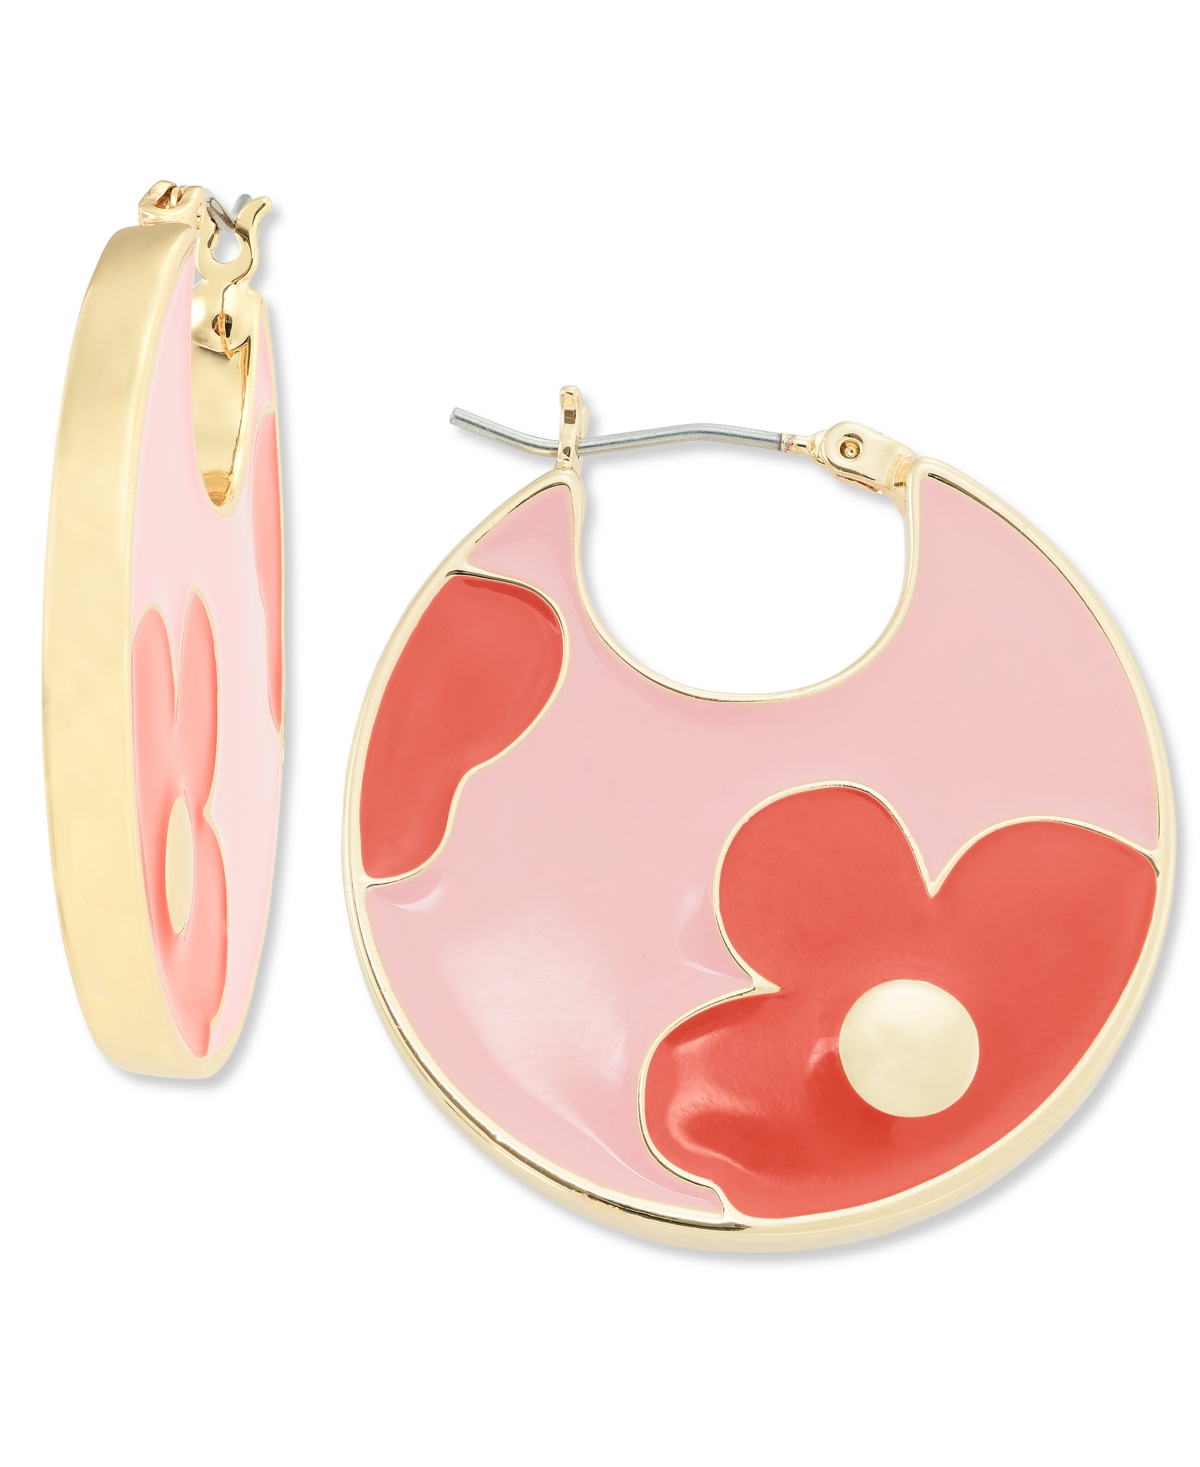 Gold-Tone Floral Enamel Round Drop Earrings, Created for Macy's - Green